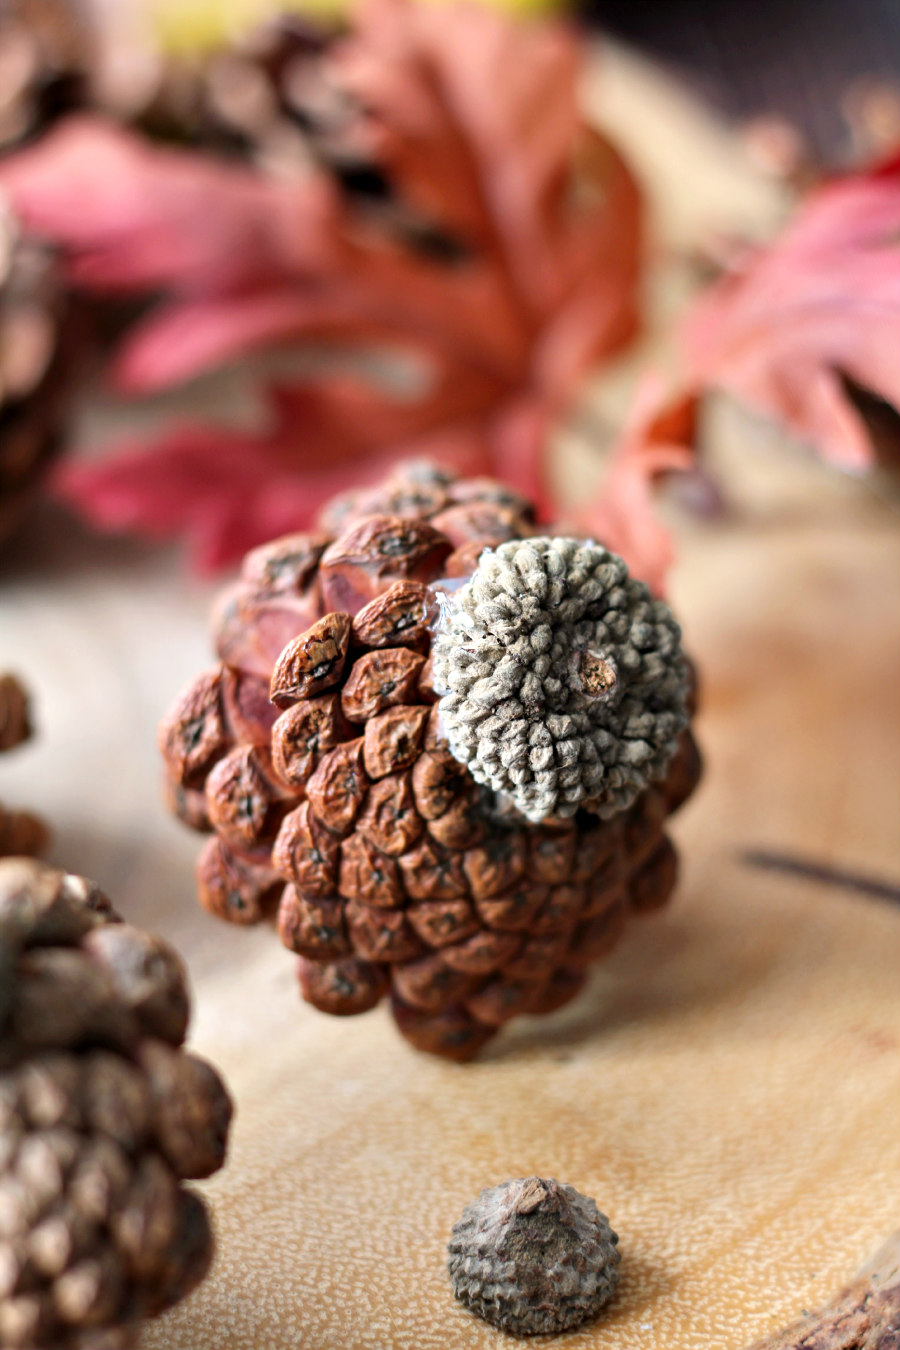 Acorn cap hot glued onto pine cone to form turkey head and body. Other pine cones and autumn leaves also pictured on wood slice.